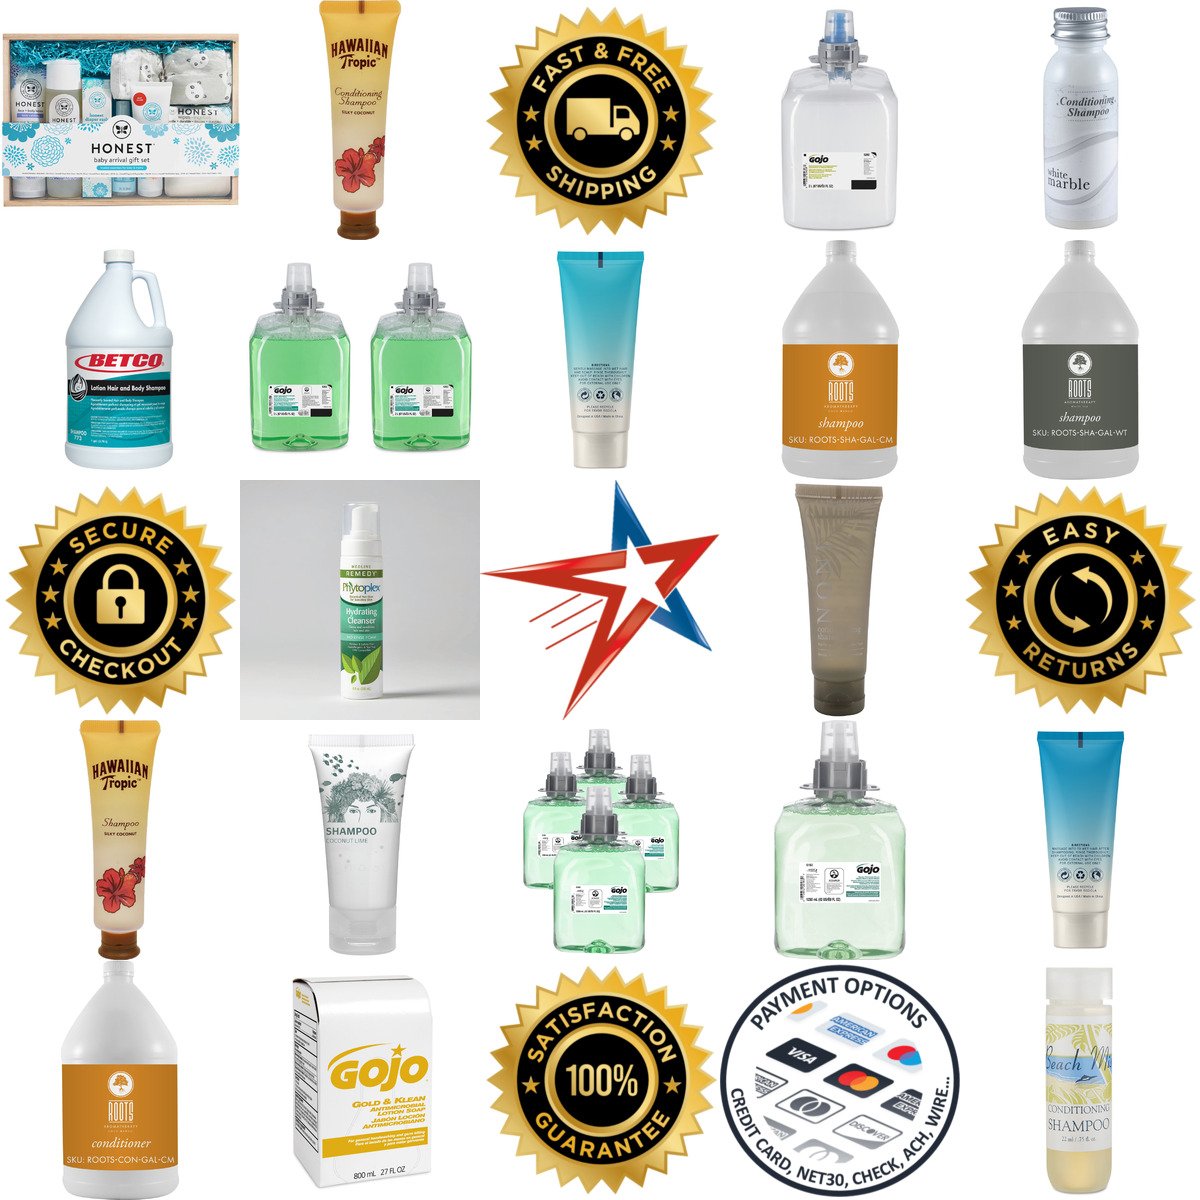 A selection of Hair Care products on GoVets